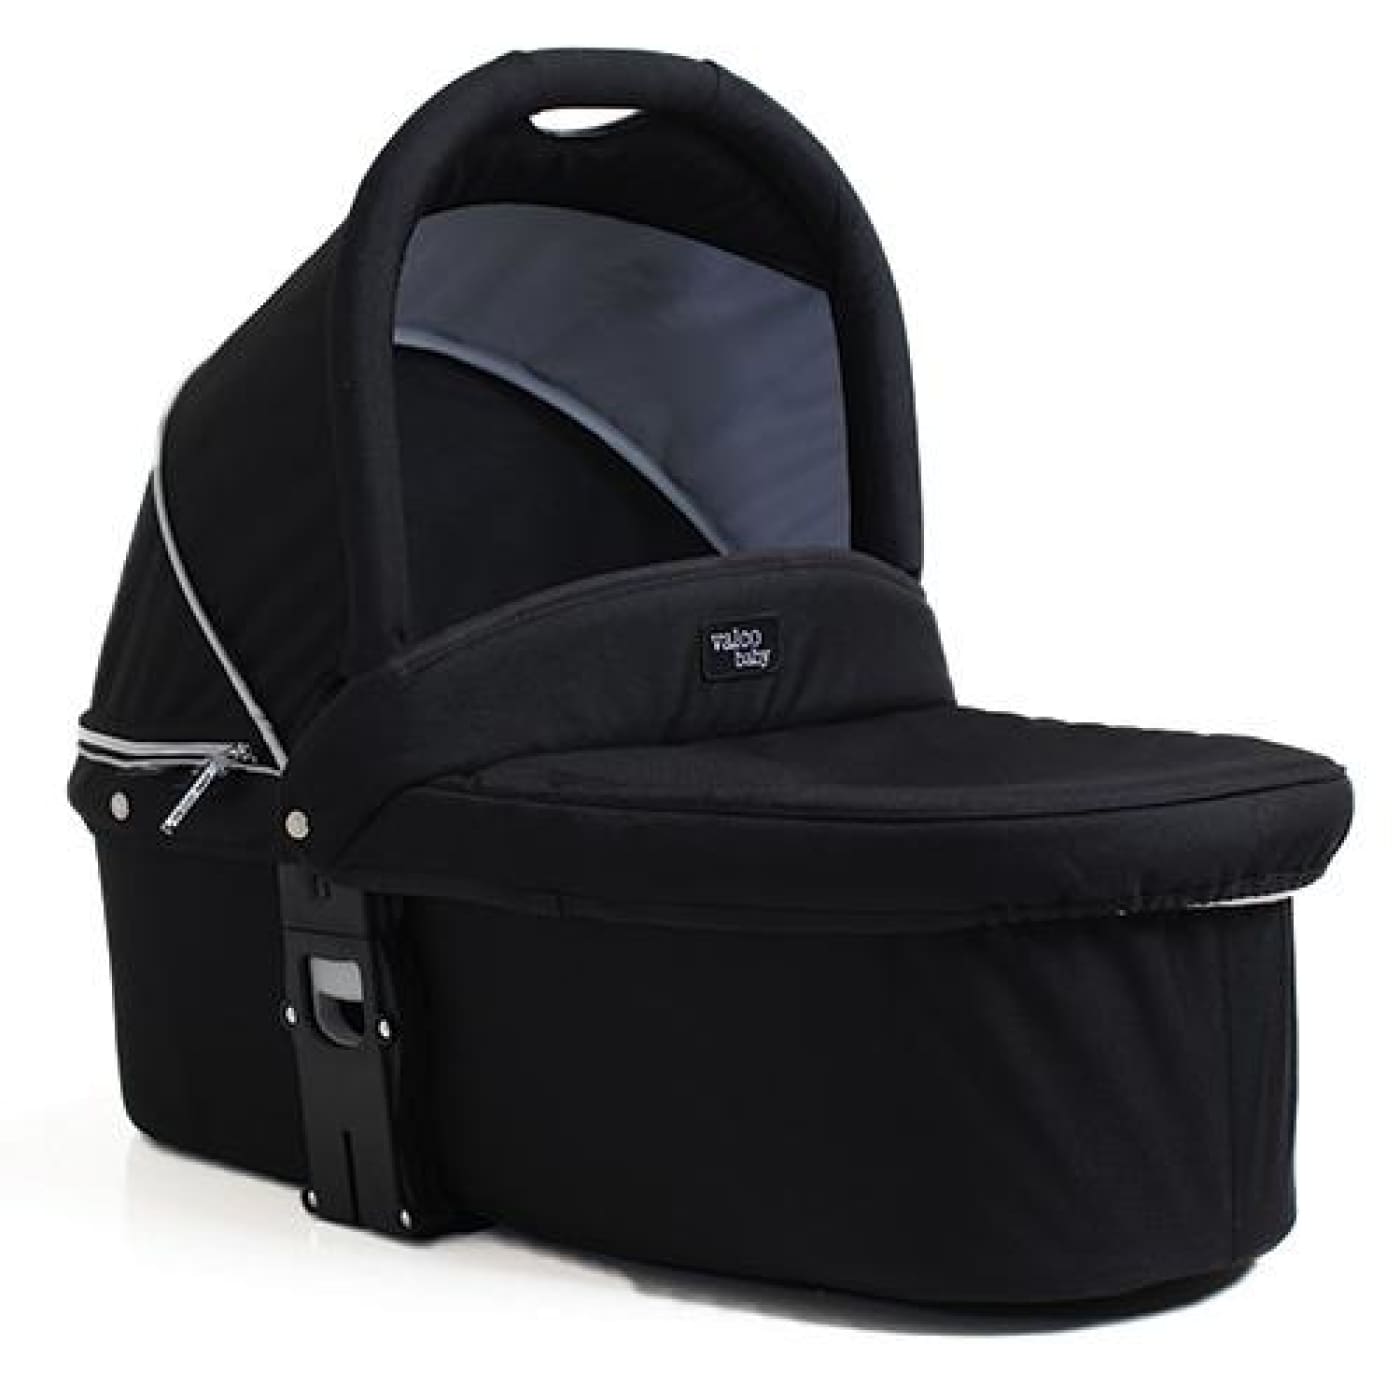 Valco Baby Q Bassinet for Snap Ultra Duo - Coal Black (ETA Unavailable) - PRAMS & STROLLERS - BASS/CARRY COTS/STANDS